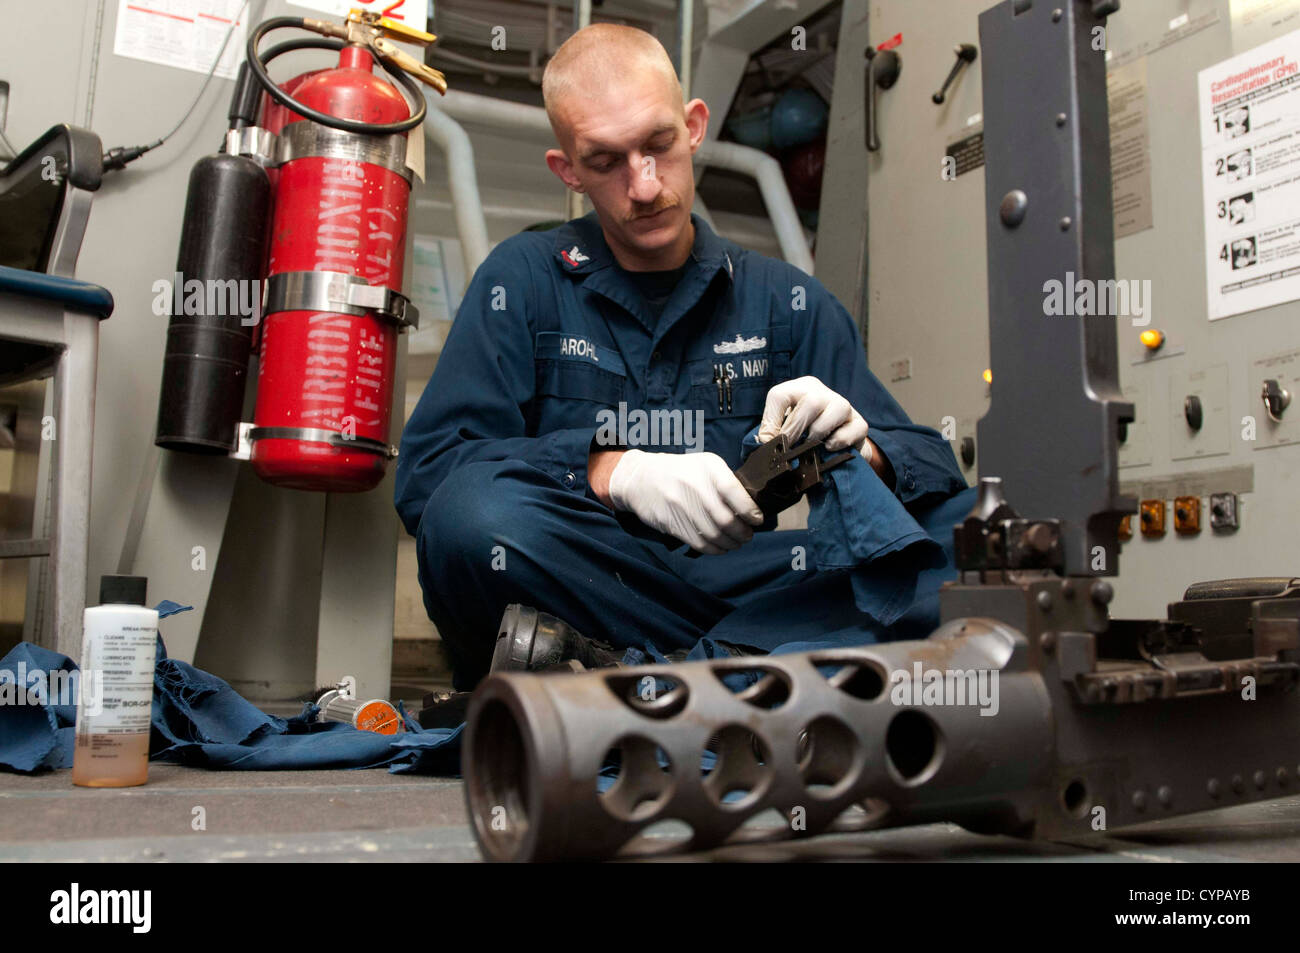 U.S. 5TH FLEET ARE OF RESPONSIBILITY (Nov. 3, 2012) Gunner's Mate 2nd Class Devon Marohl, from Oshkosh, Wis., cleans parts from Stock Photo